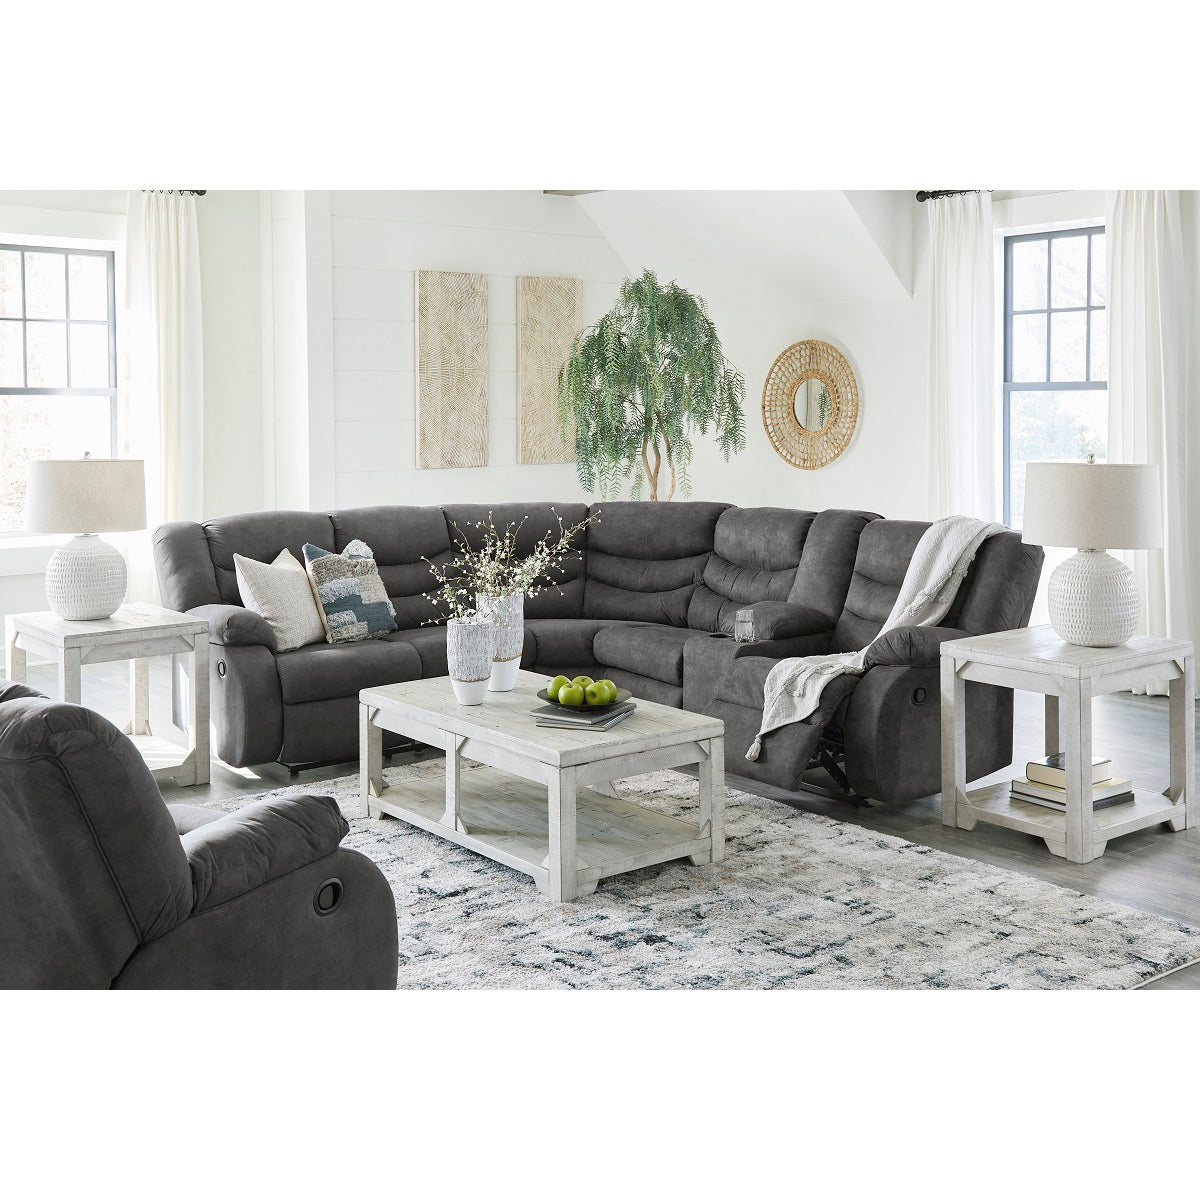 Partymate 2-Piece Manual Reclining Sectional by Ashley Furniture in Slate Gray. A modern and luxurious sectional featuring 6 spacious seats,  cup holders, and a storage console on the right side. Plush cushioning in the seats, arms, and backs for ultimate comfort. Slate gray faux leather upholstery is easy to maintain and clean.